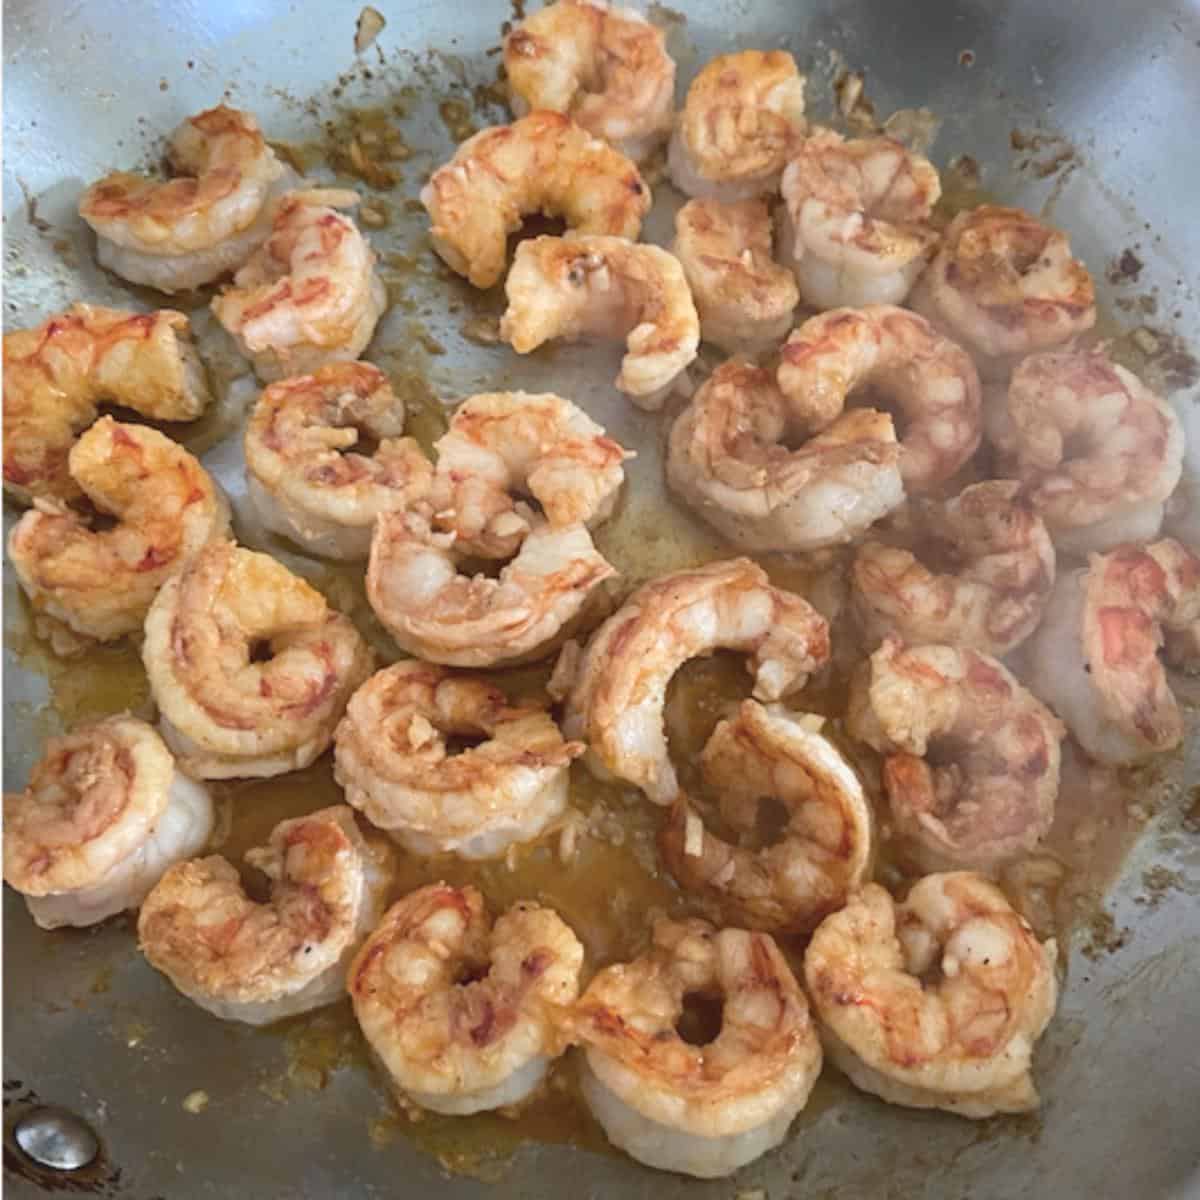 shrimp flipped over and searing on other side